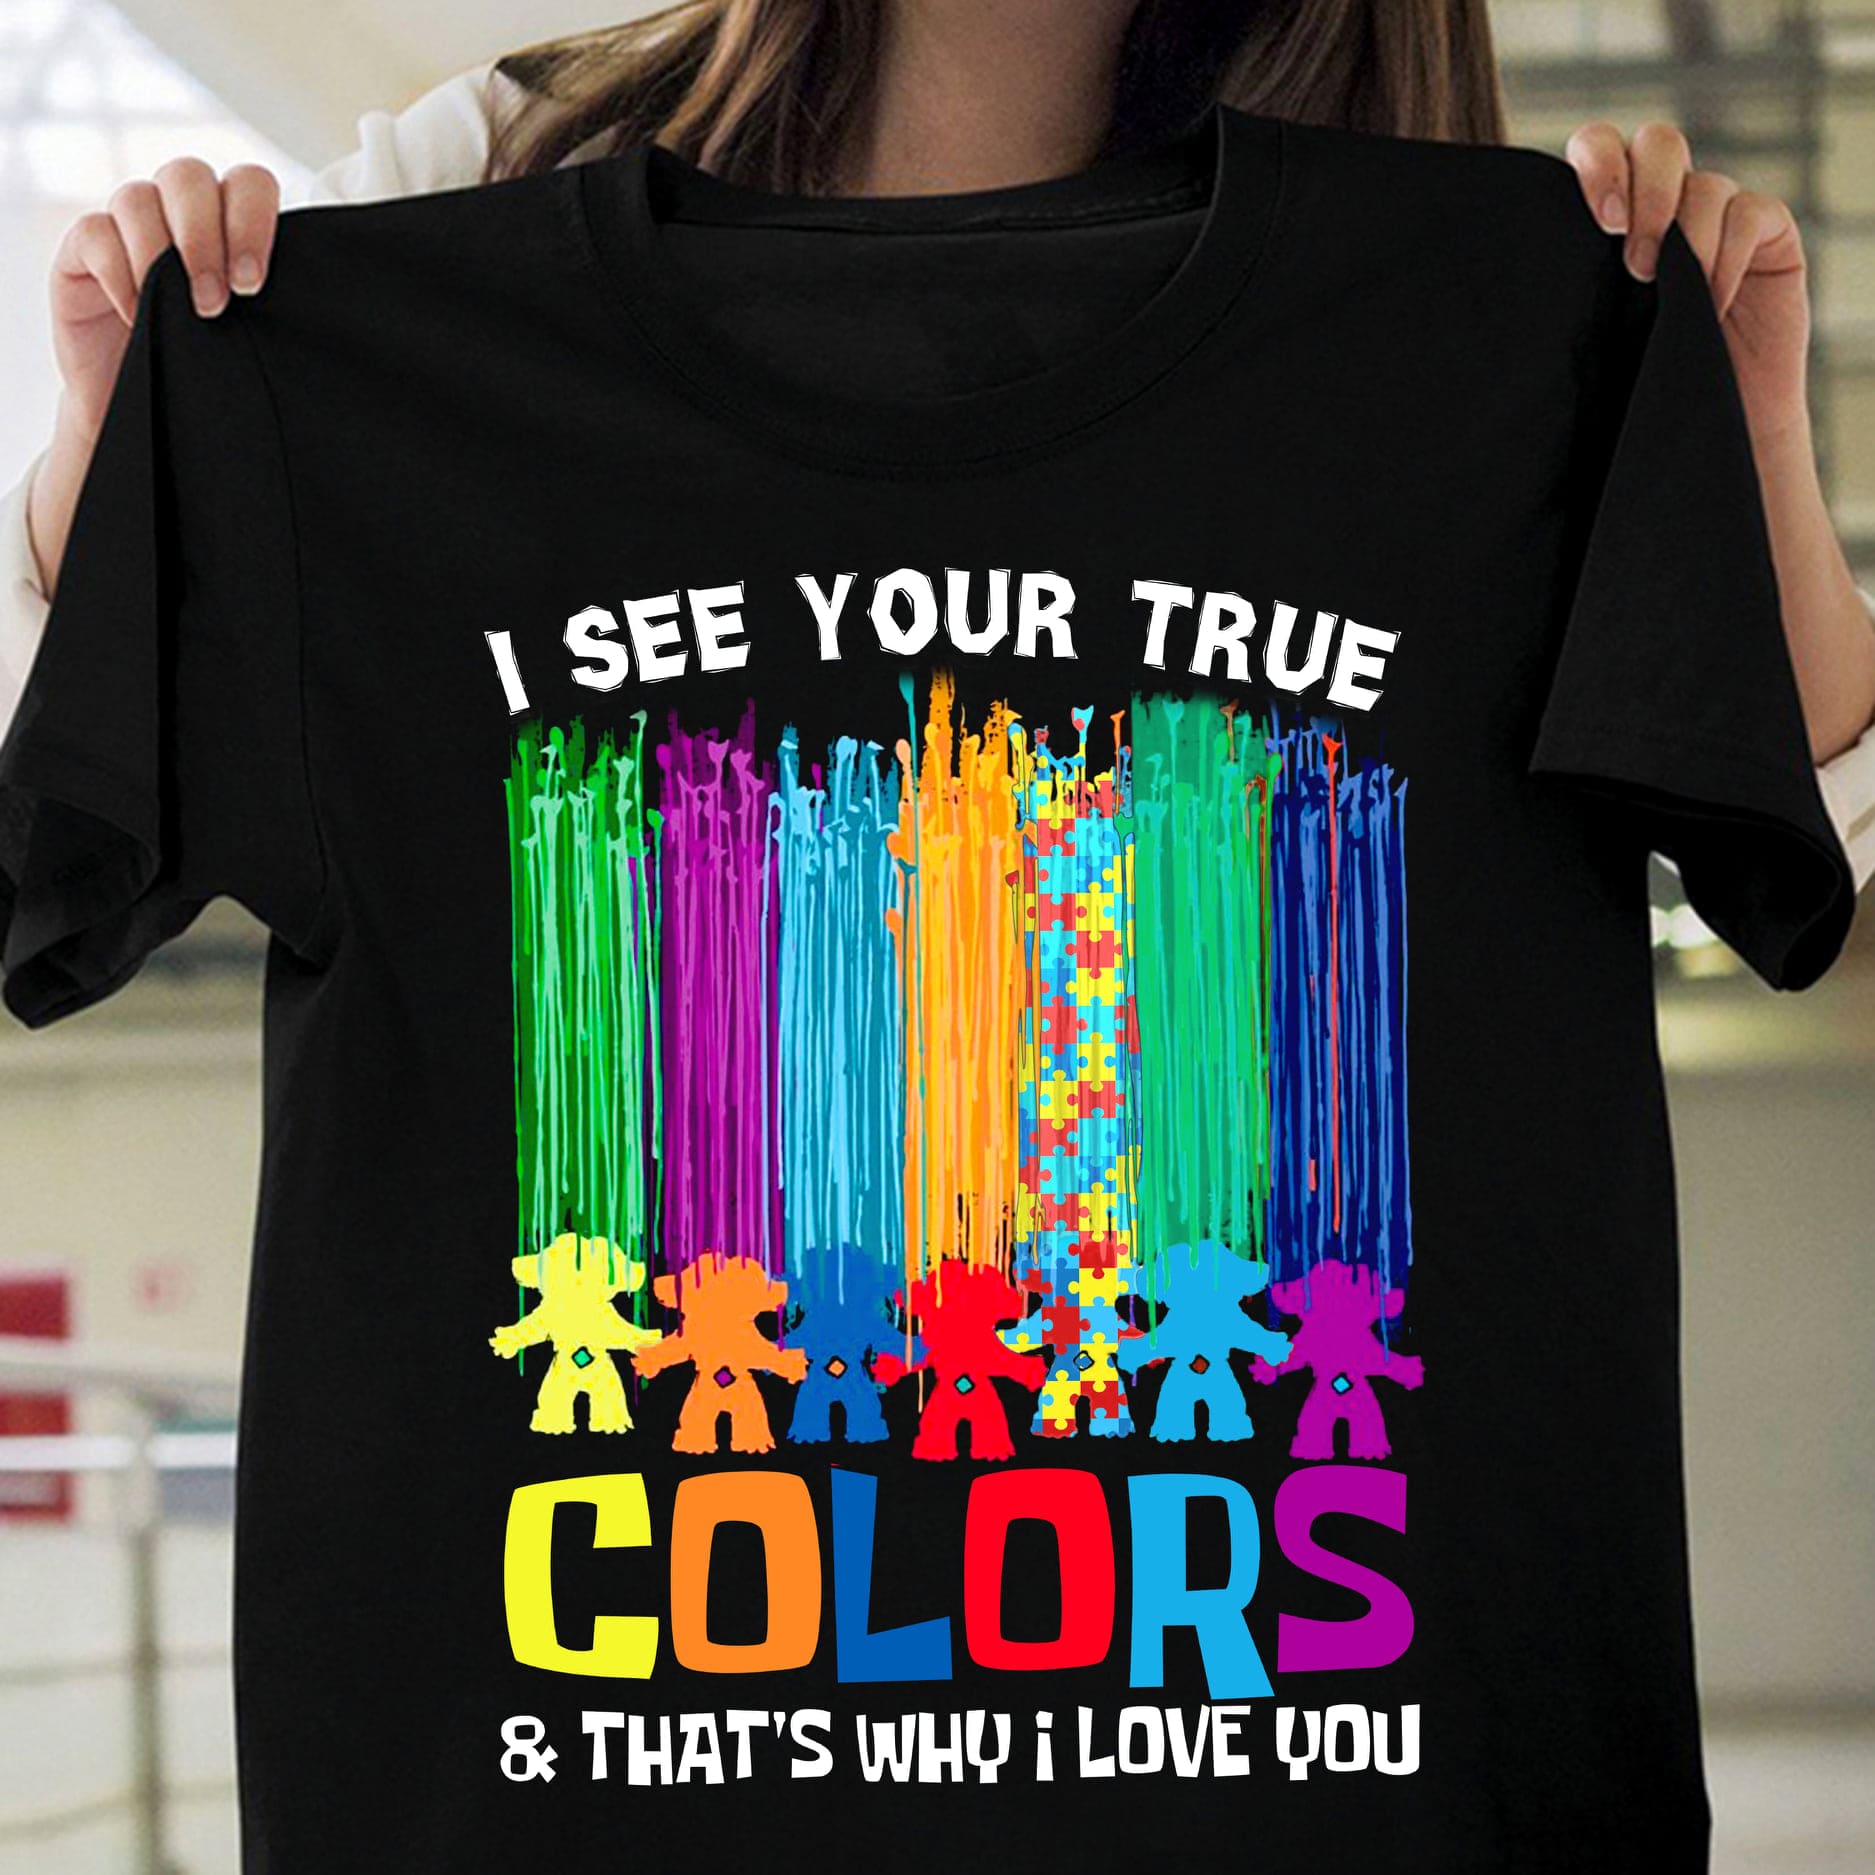 Autism People - I see your true colors and that's why i love you